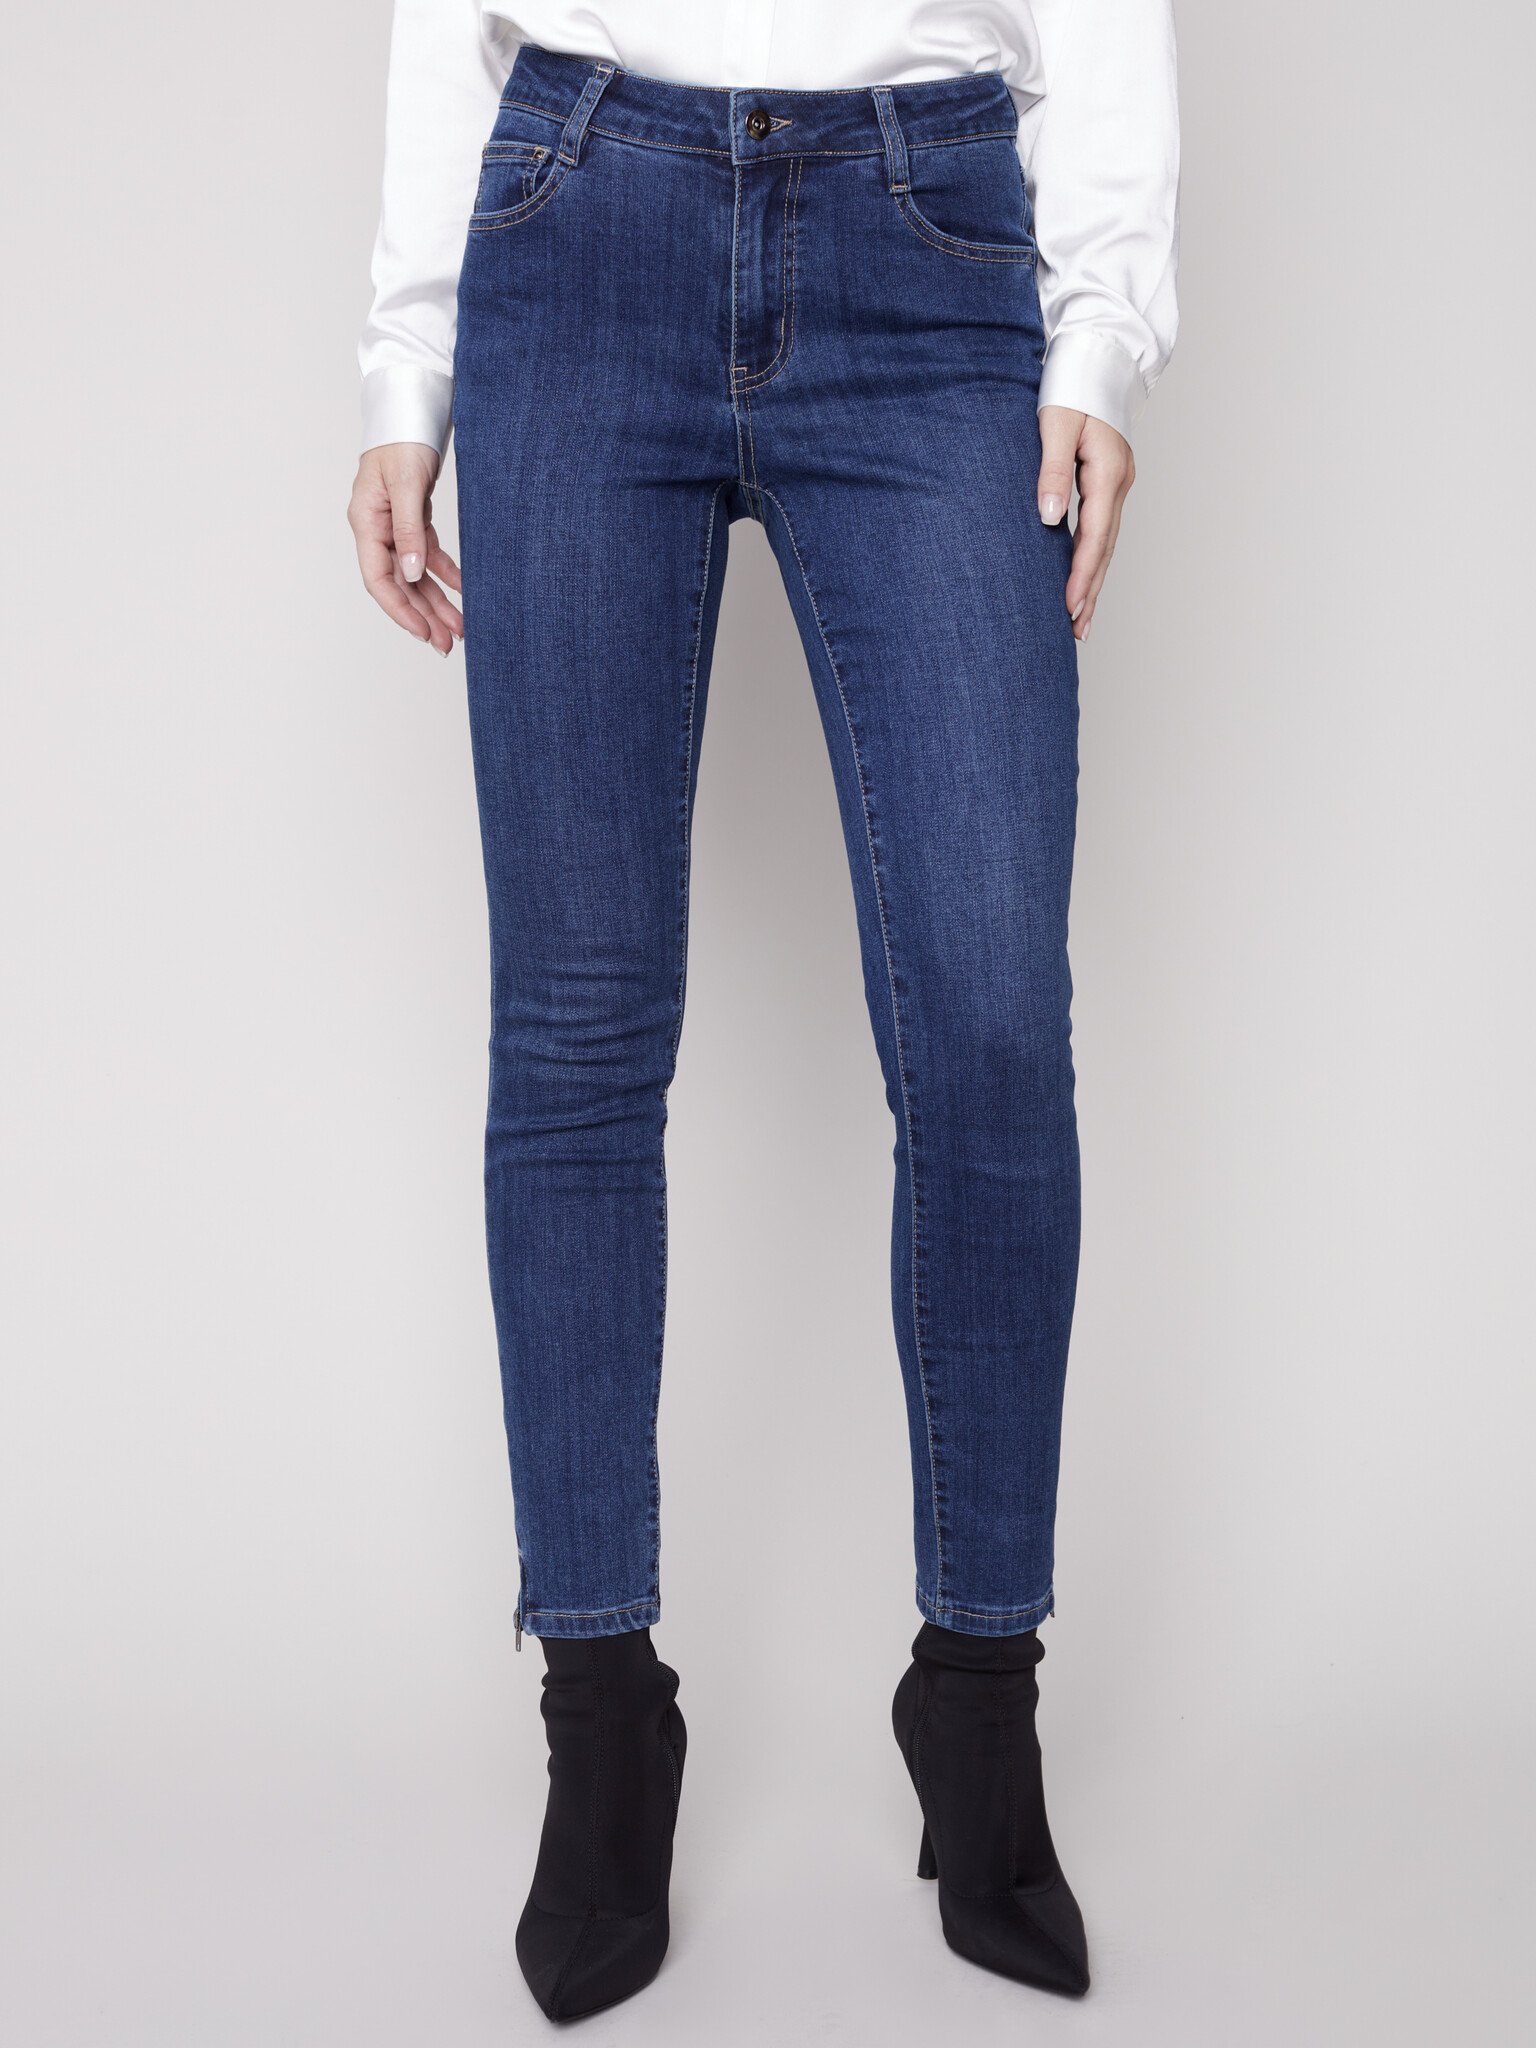 Jeans with Side Zipper-6